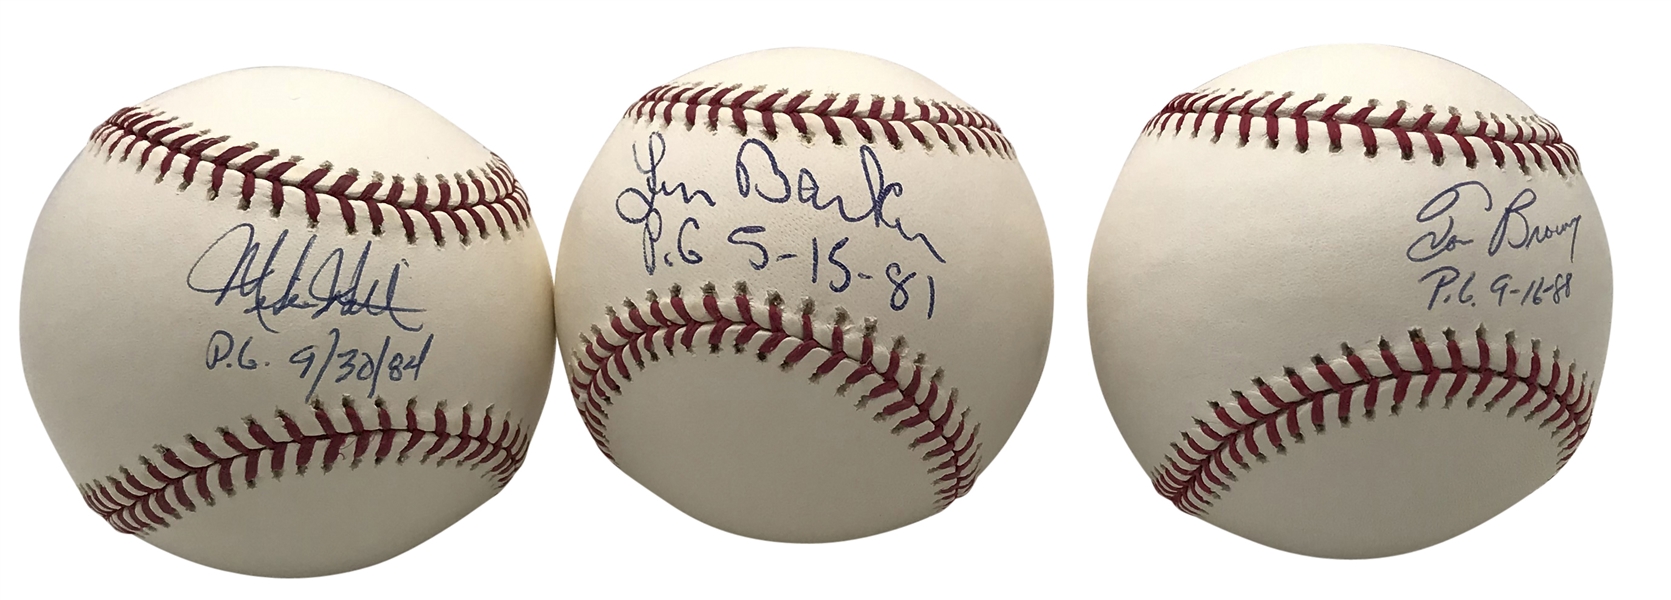 1980s Perfect Game Pitchers Lot of Three (3) Signed & Inscribed Baseballs w/ Barker, Witt & Browning (Beckett/BAS Guaranteed)